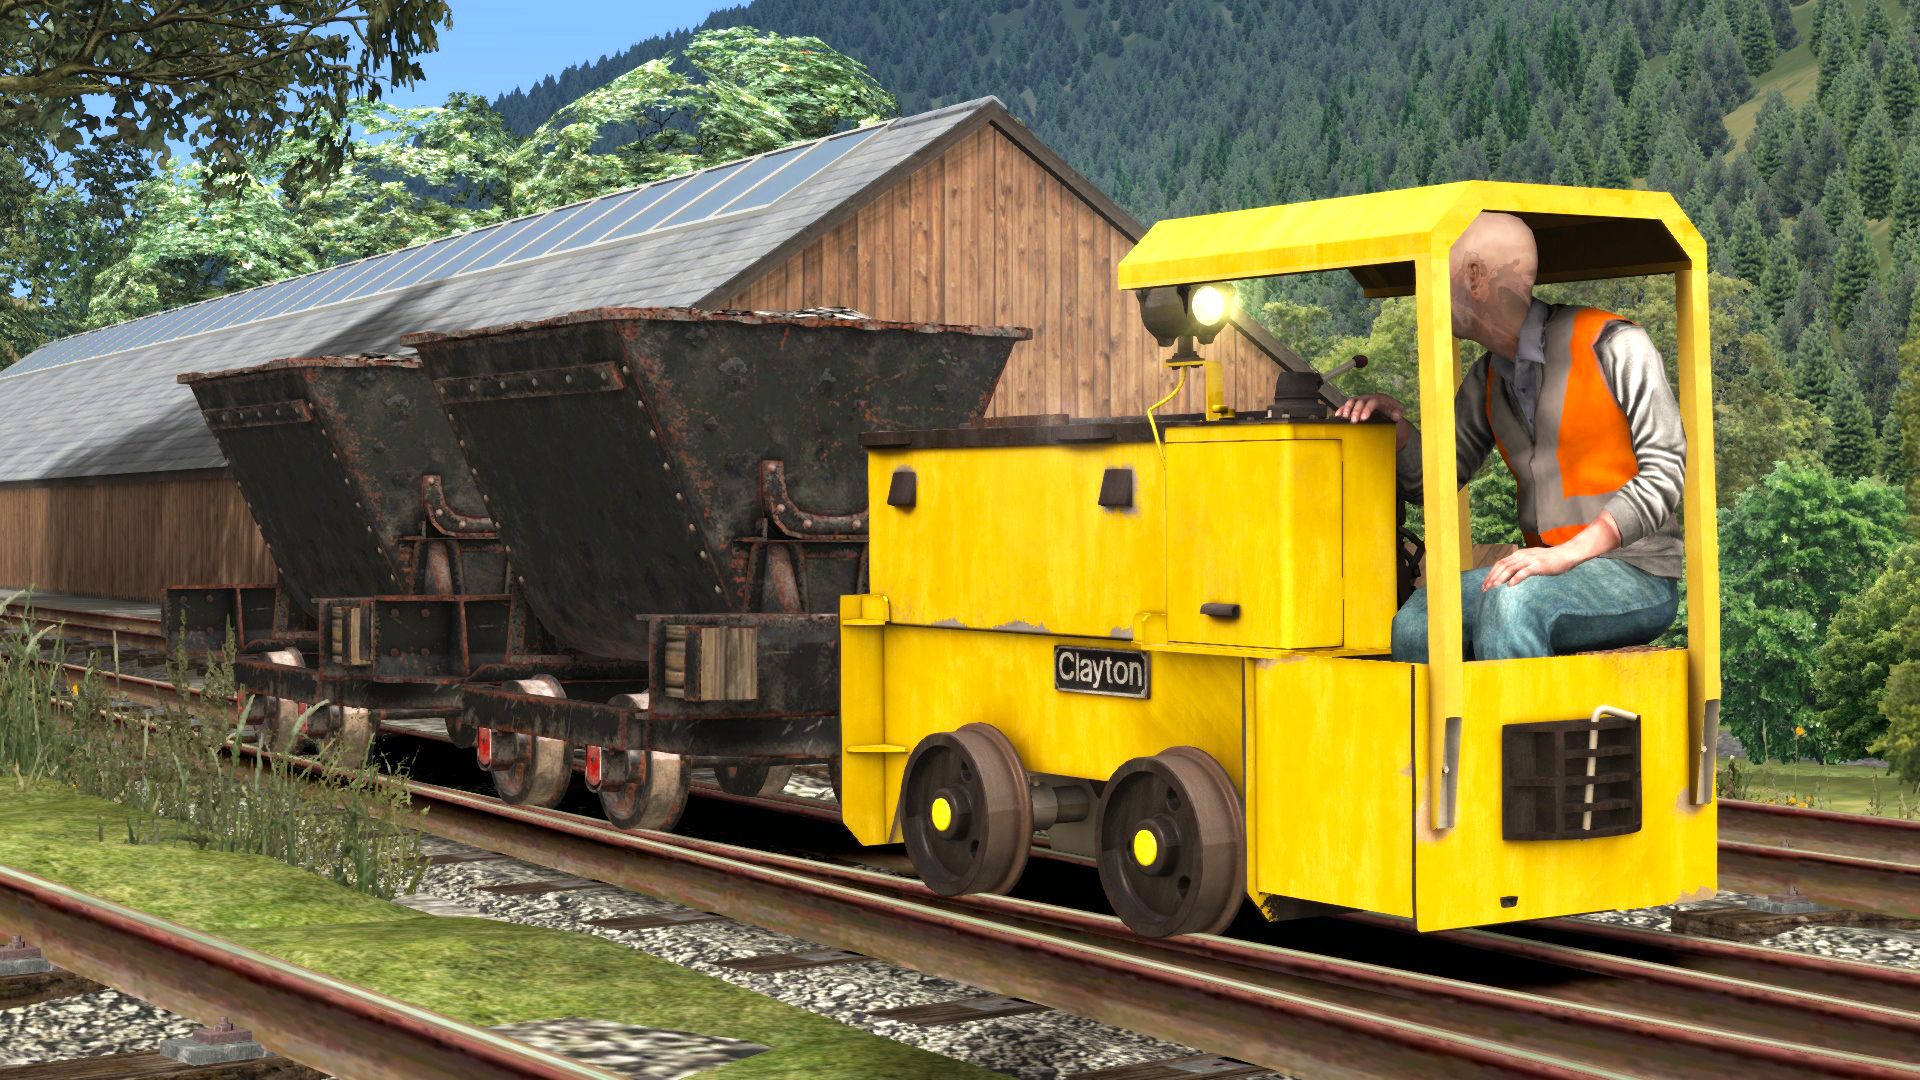 Image showing a locomotive from the Corris Railway Expansion Pack